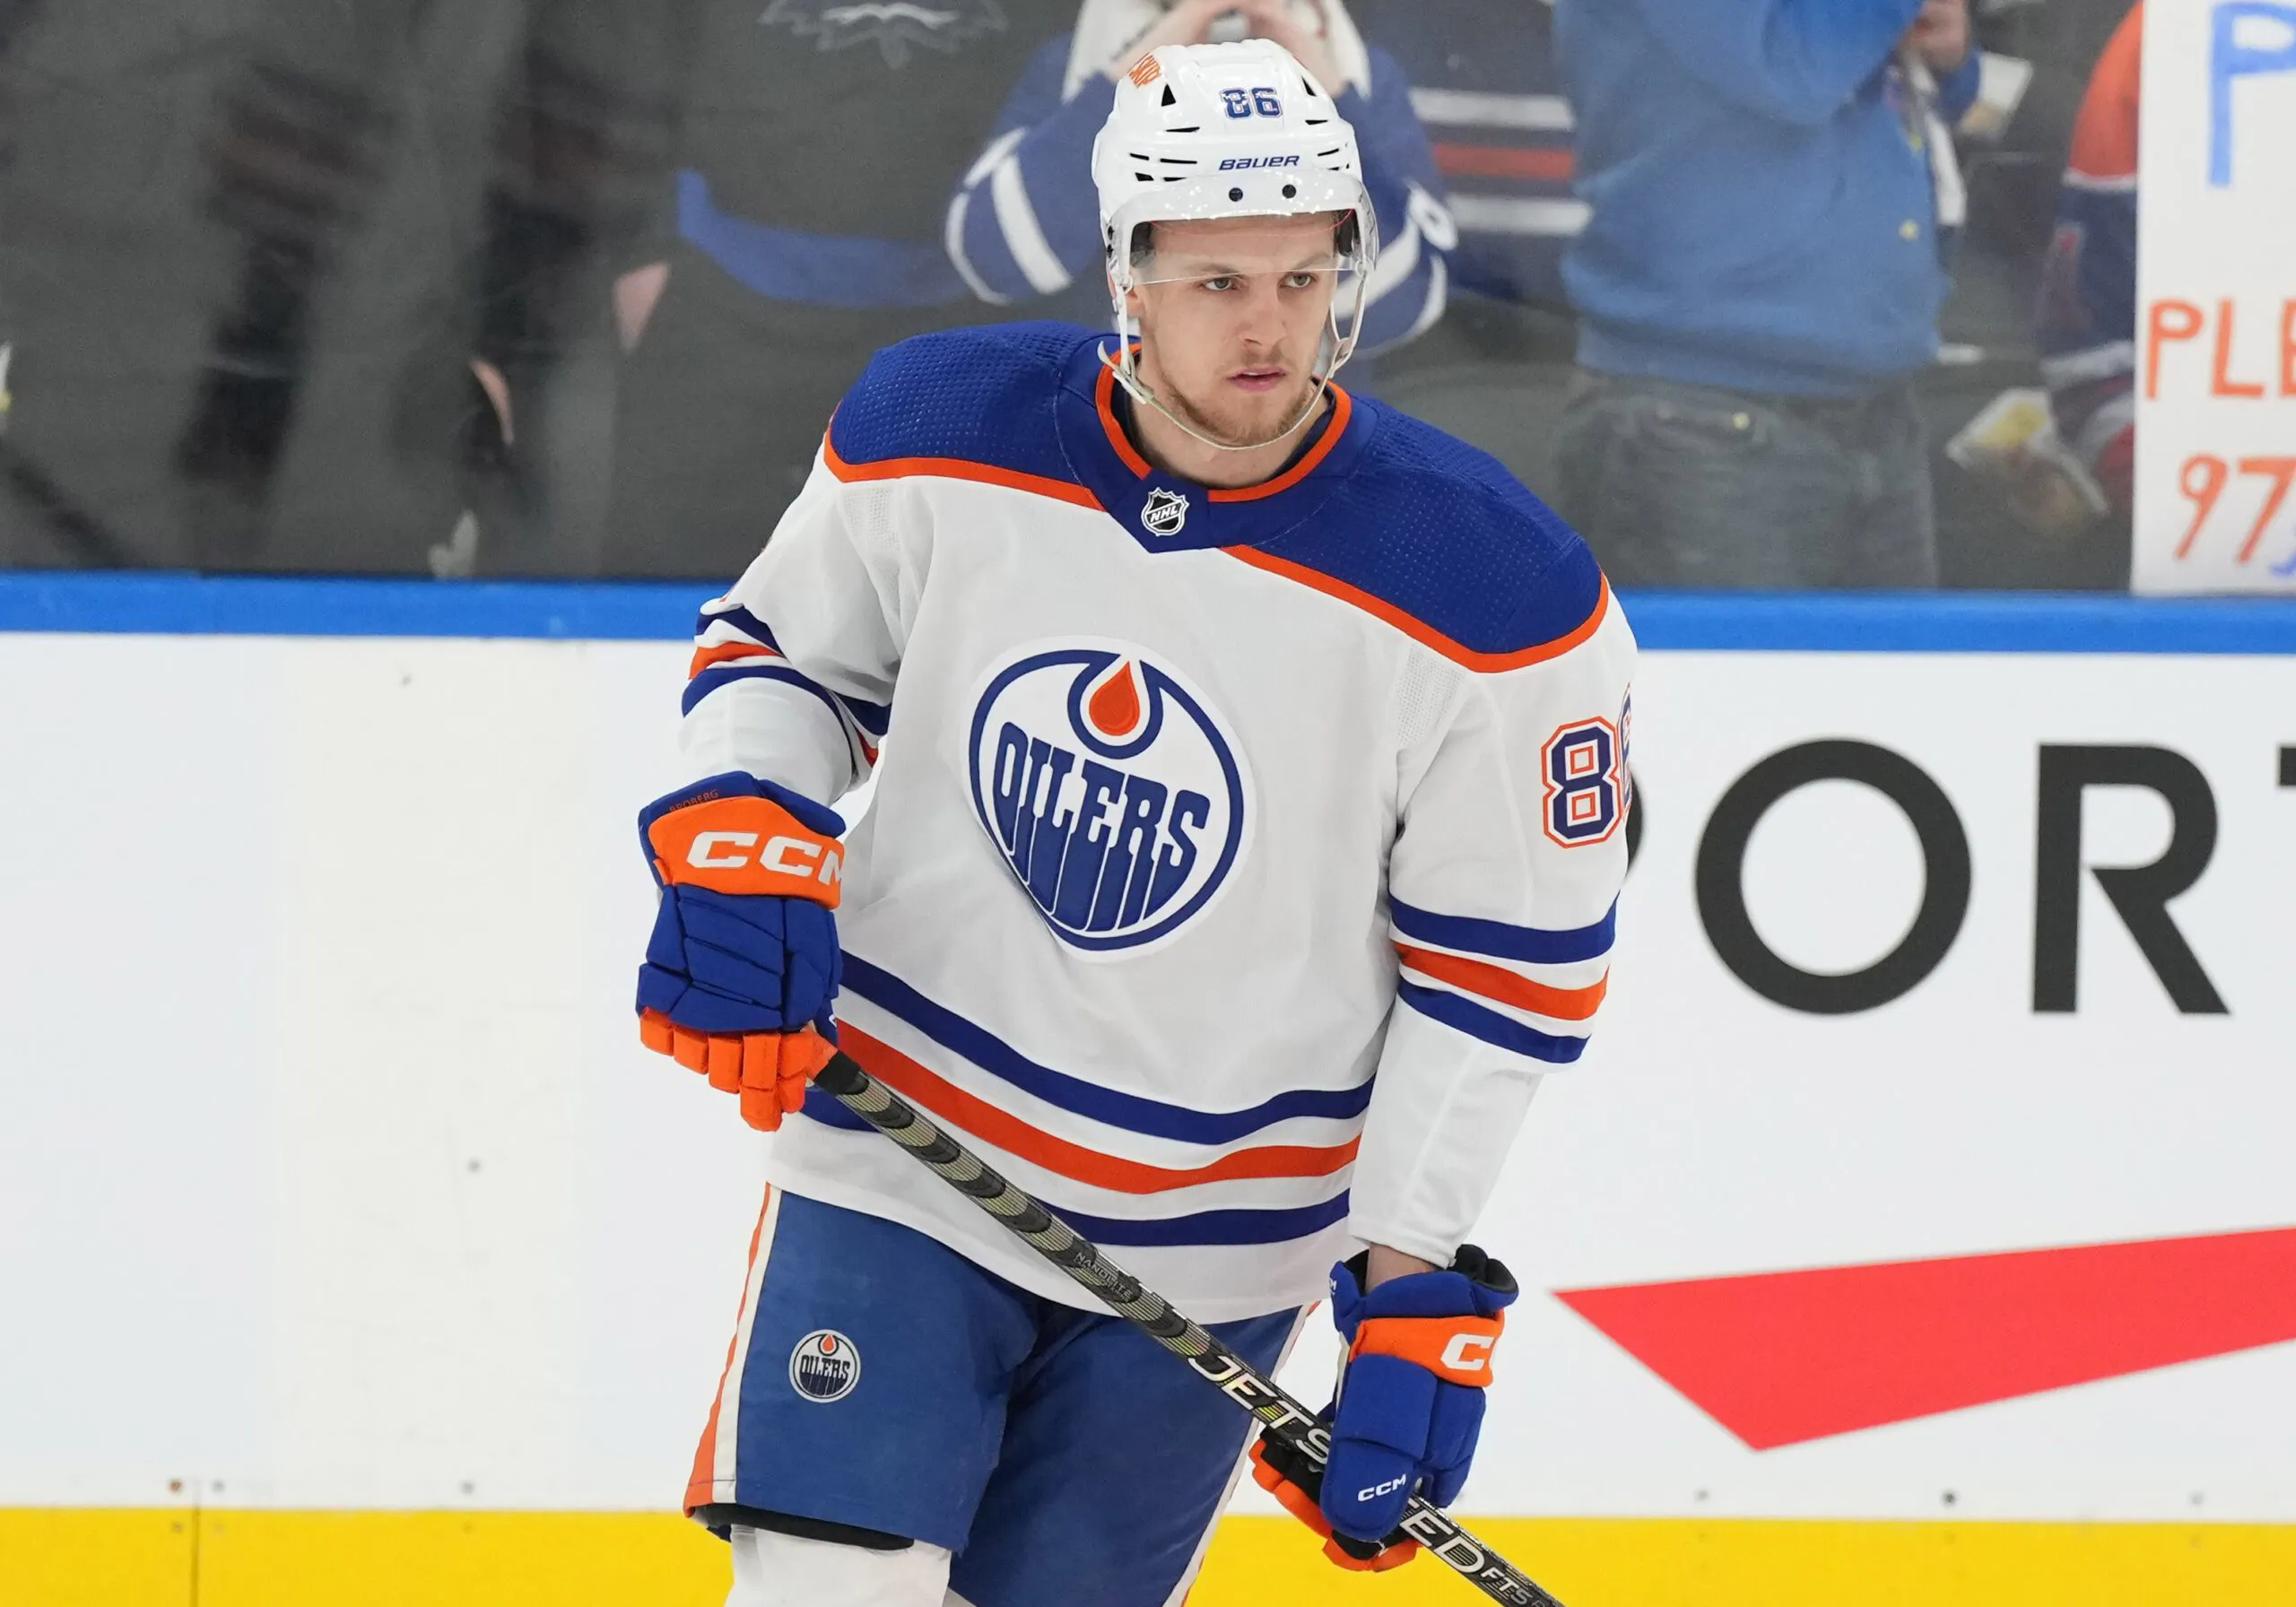 Report: Edmonton Oilers prospect Philip Broberg expected to miss 2-3 weeks with injury